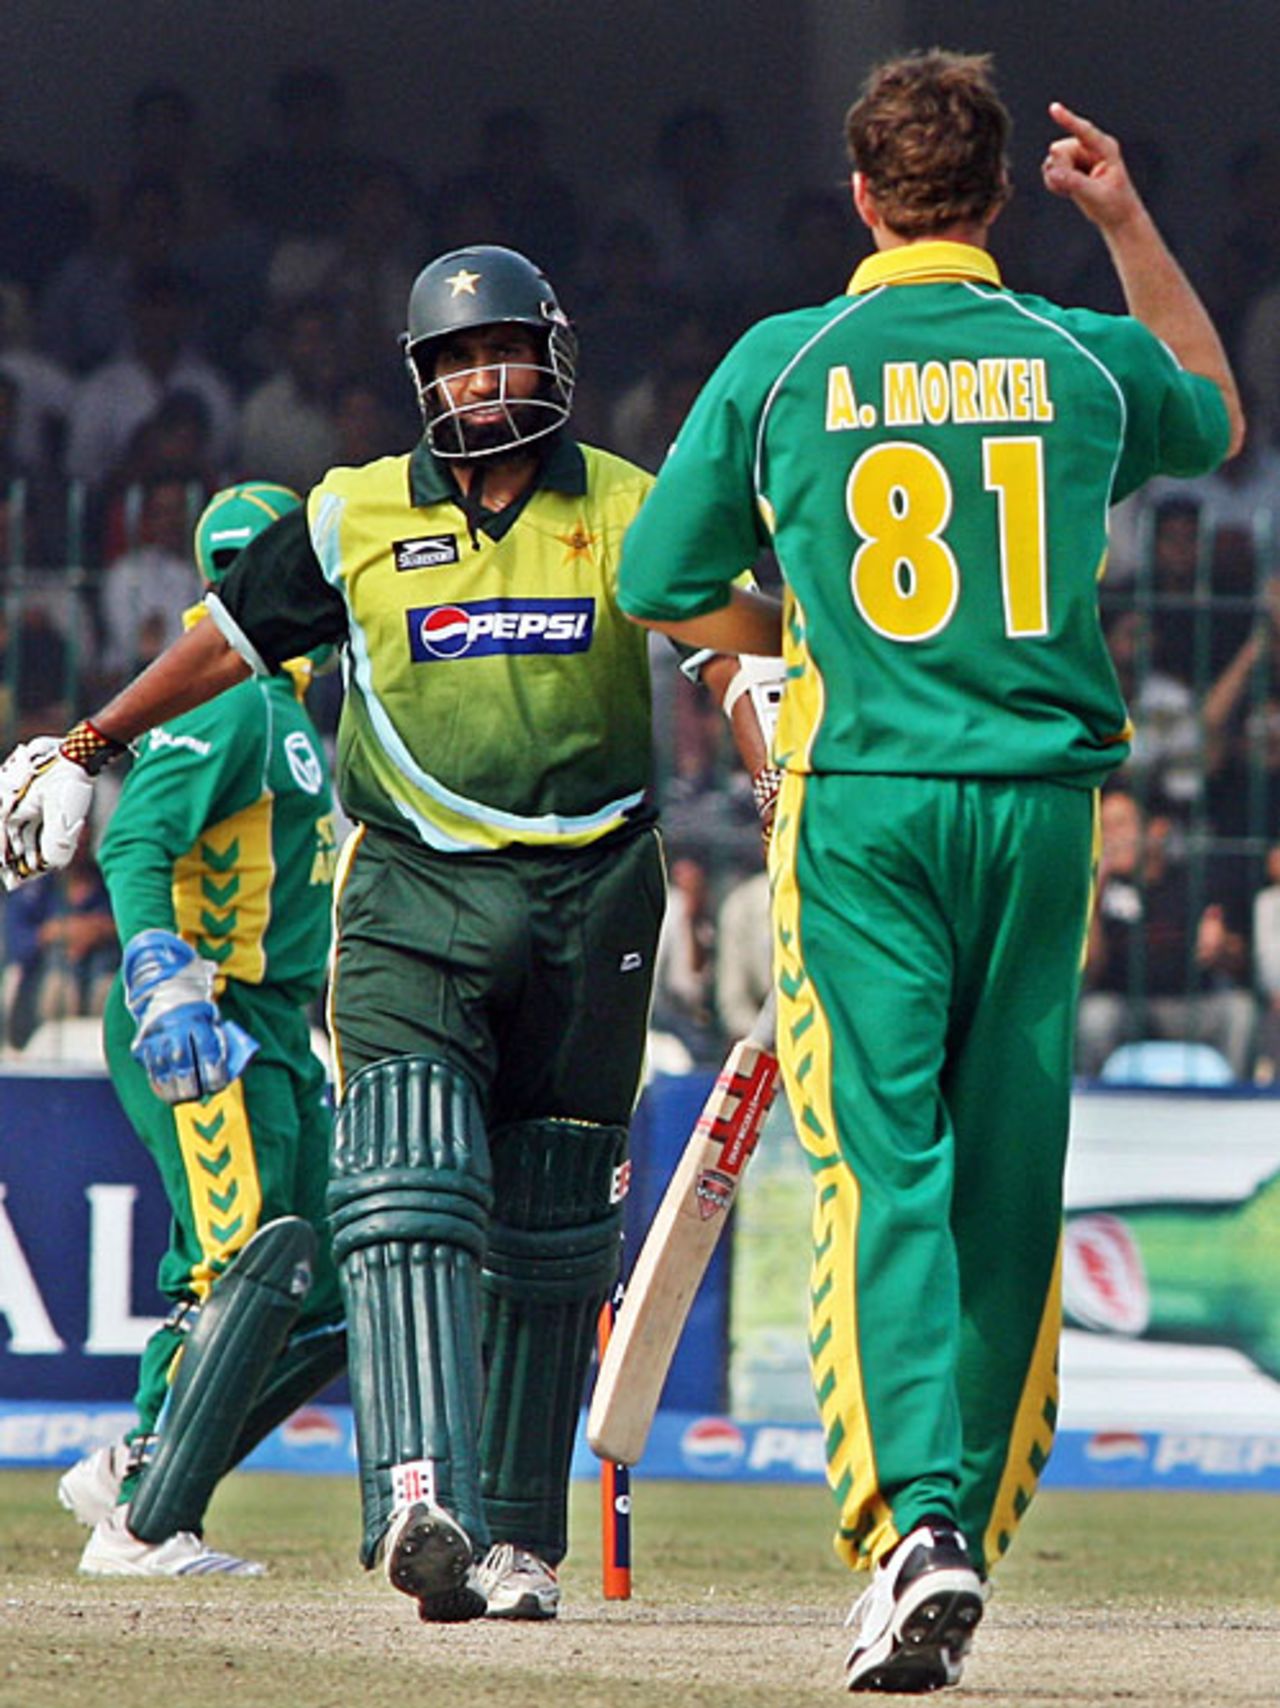 Albie Morkel celebrates after bowling Mohammad Yousuf, Pakistan v South Africa, 2nd ODI, Lahore, October 20, 2007